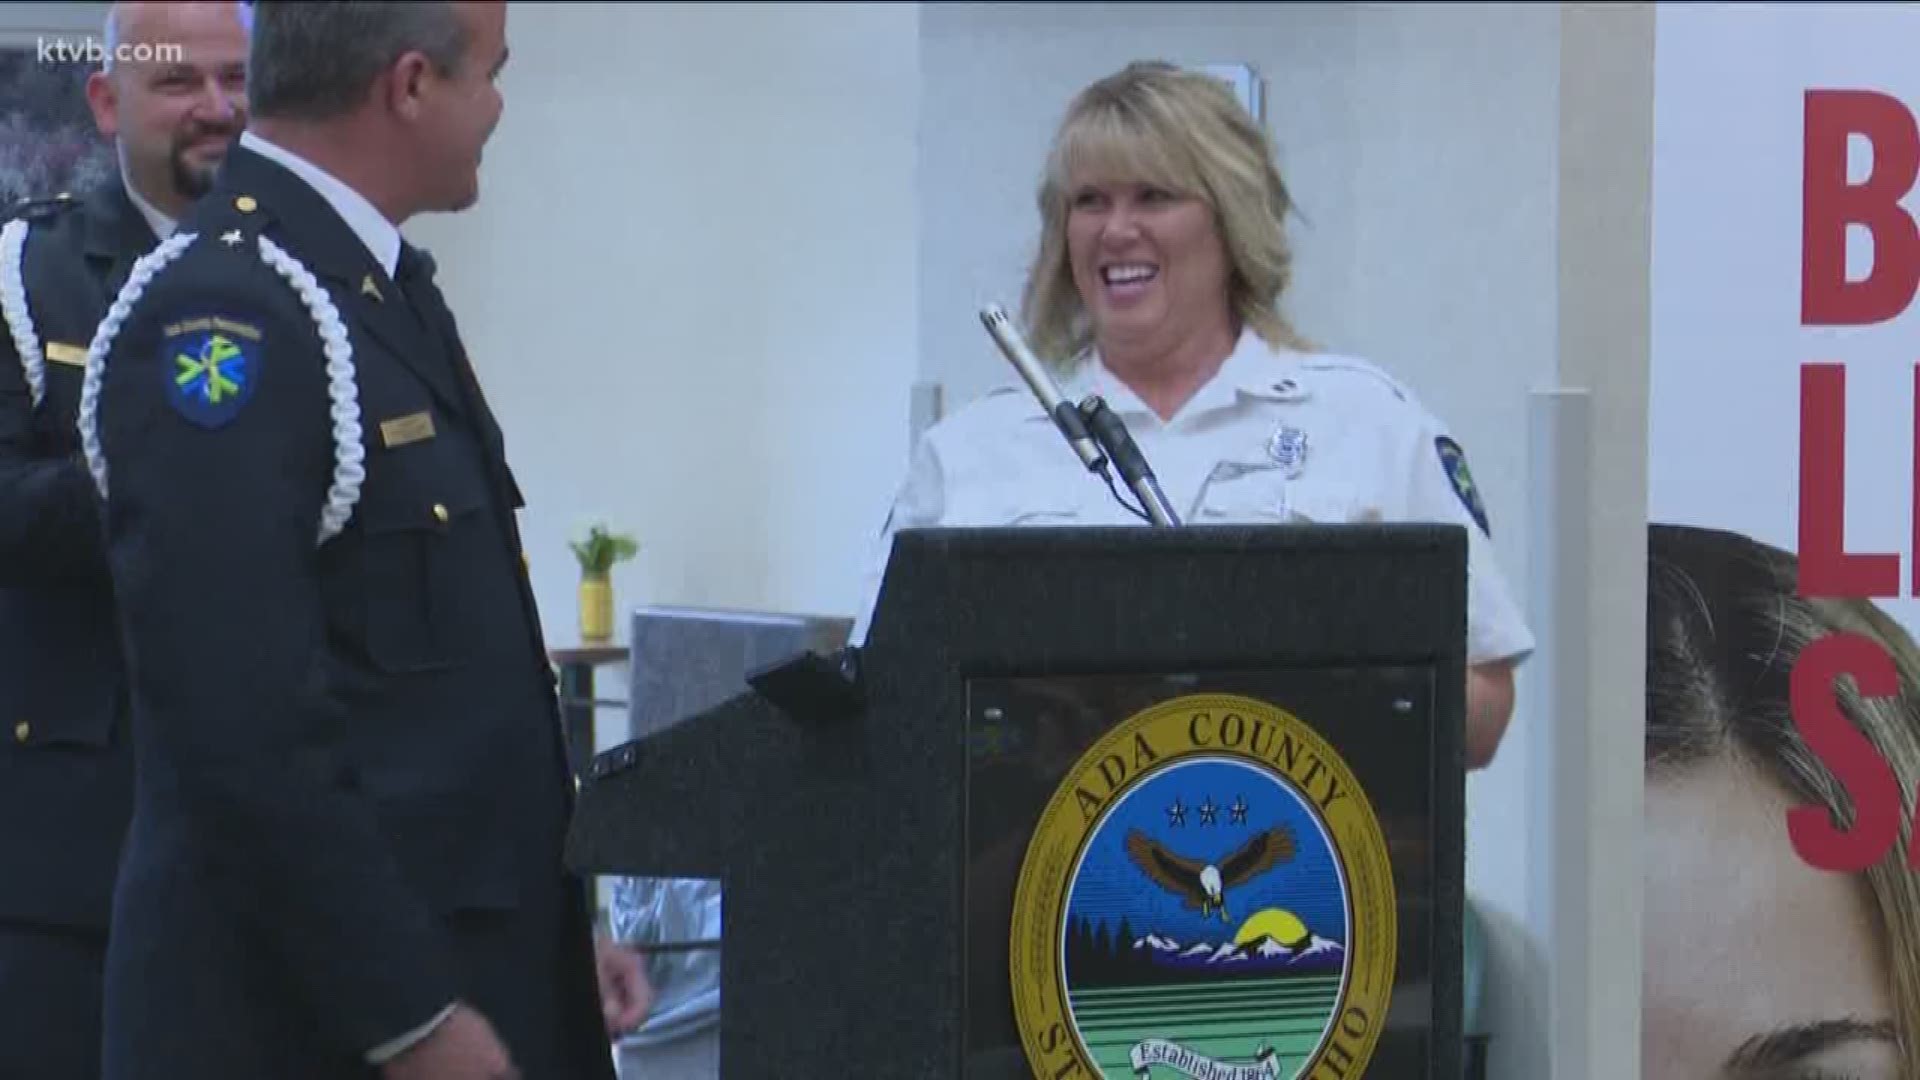 First responders honored for lifesaving efforts